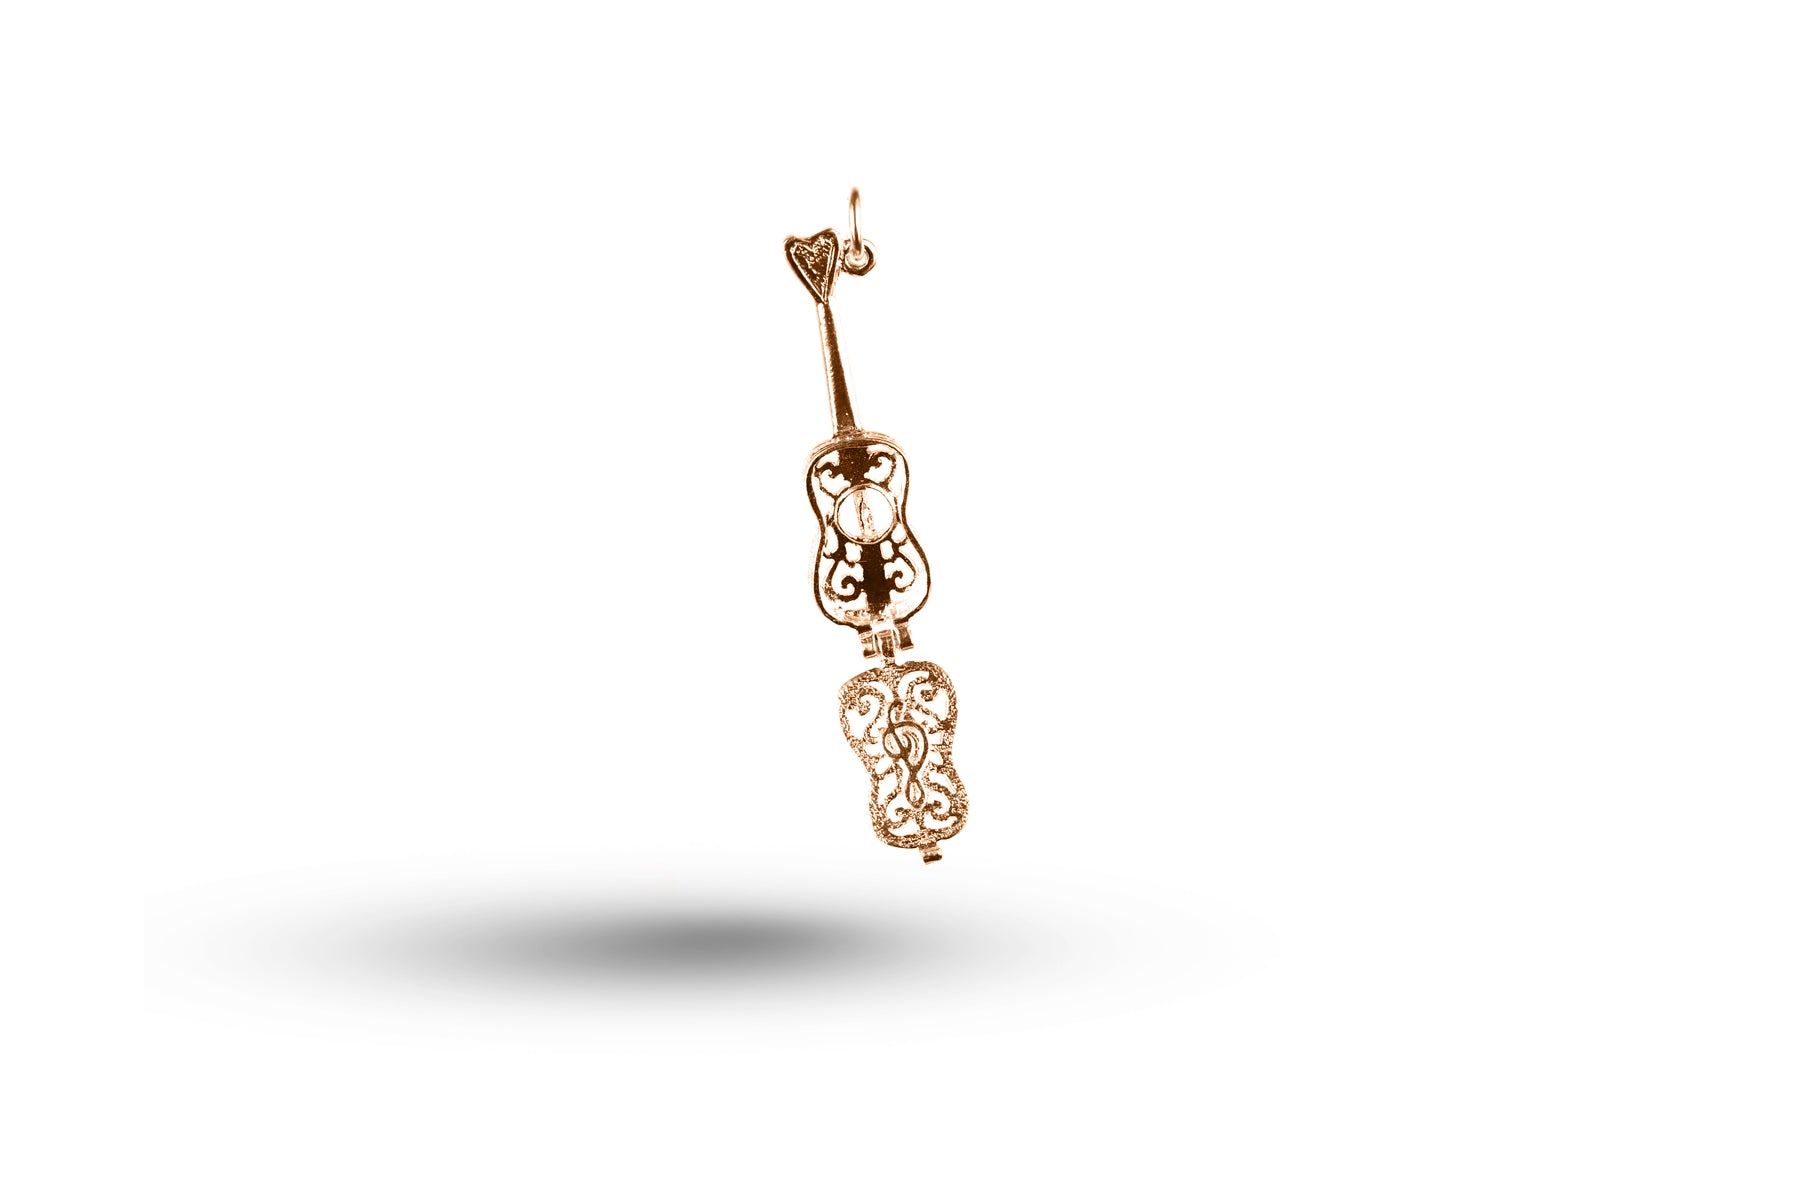 Rose gold Opening Guitar charm.